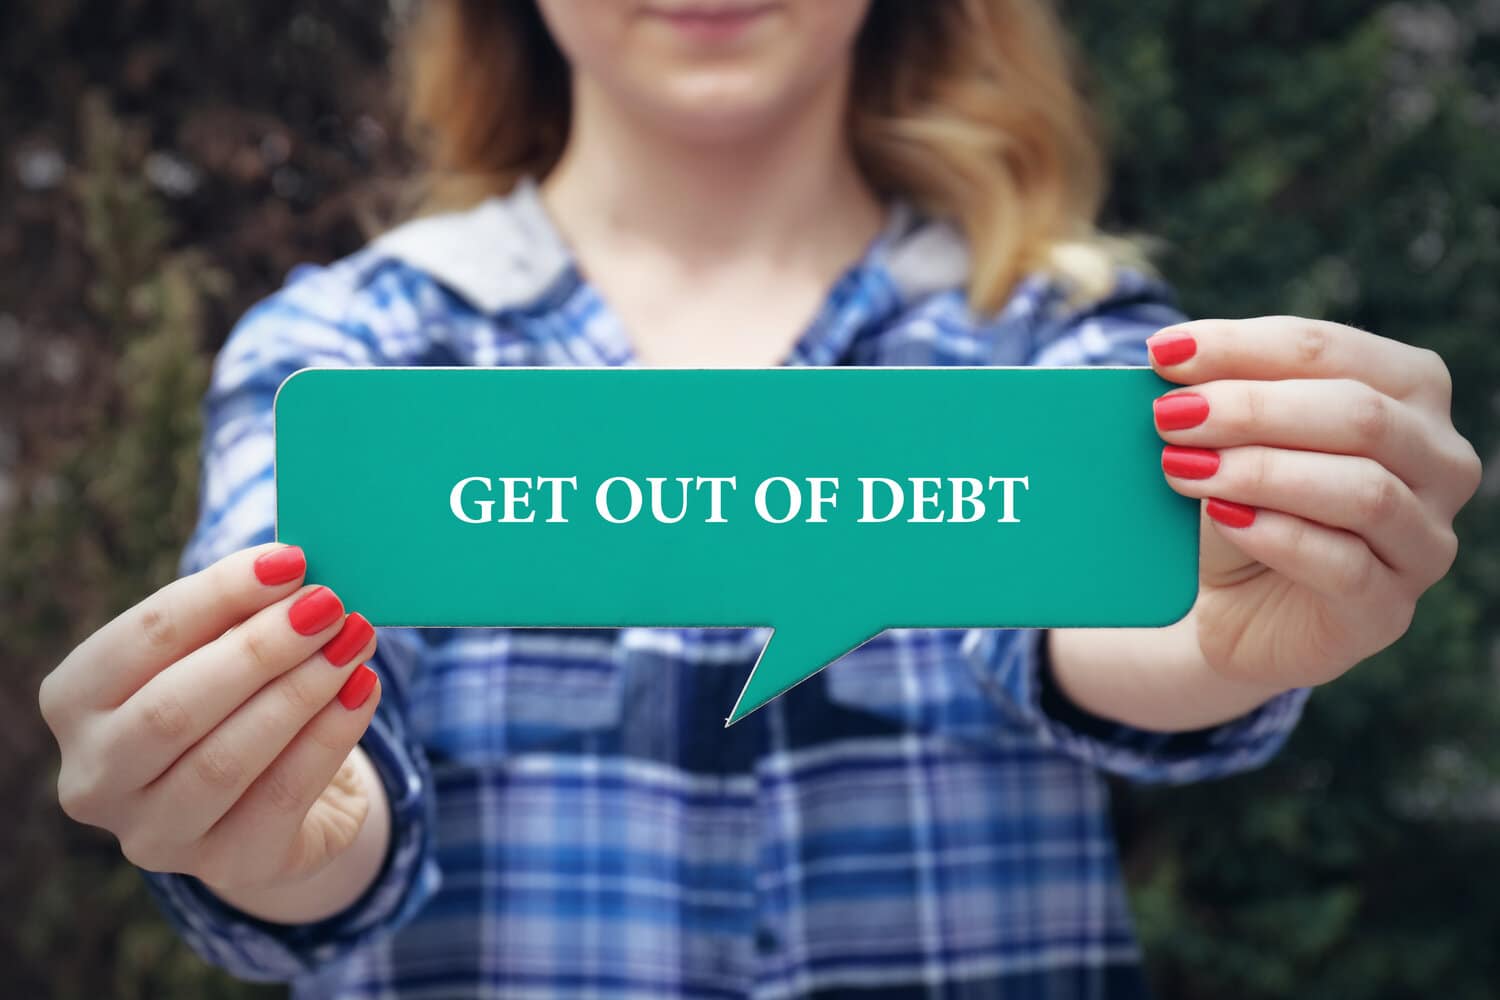 Find free debt advice to help money and relationships